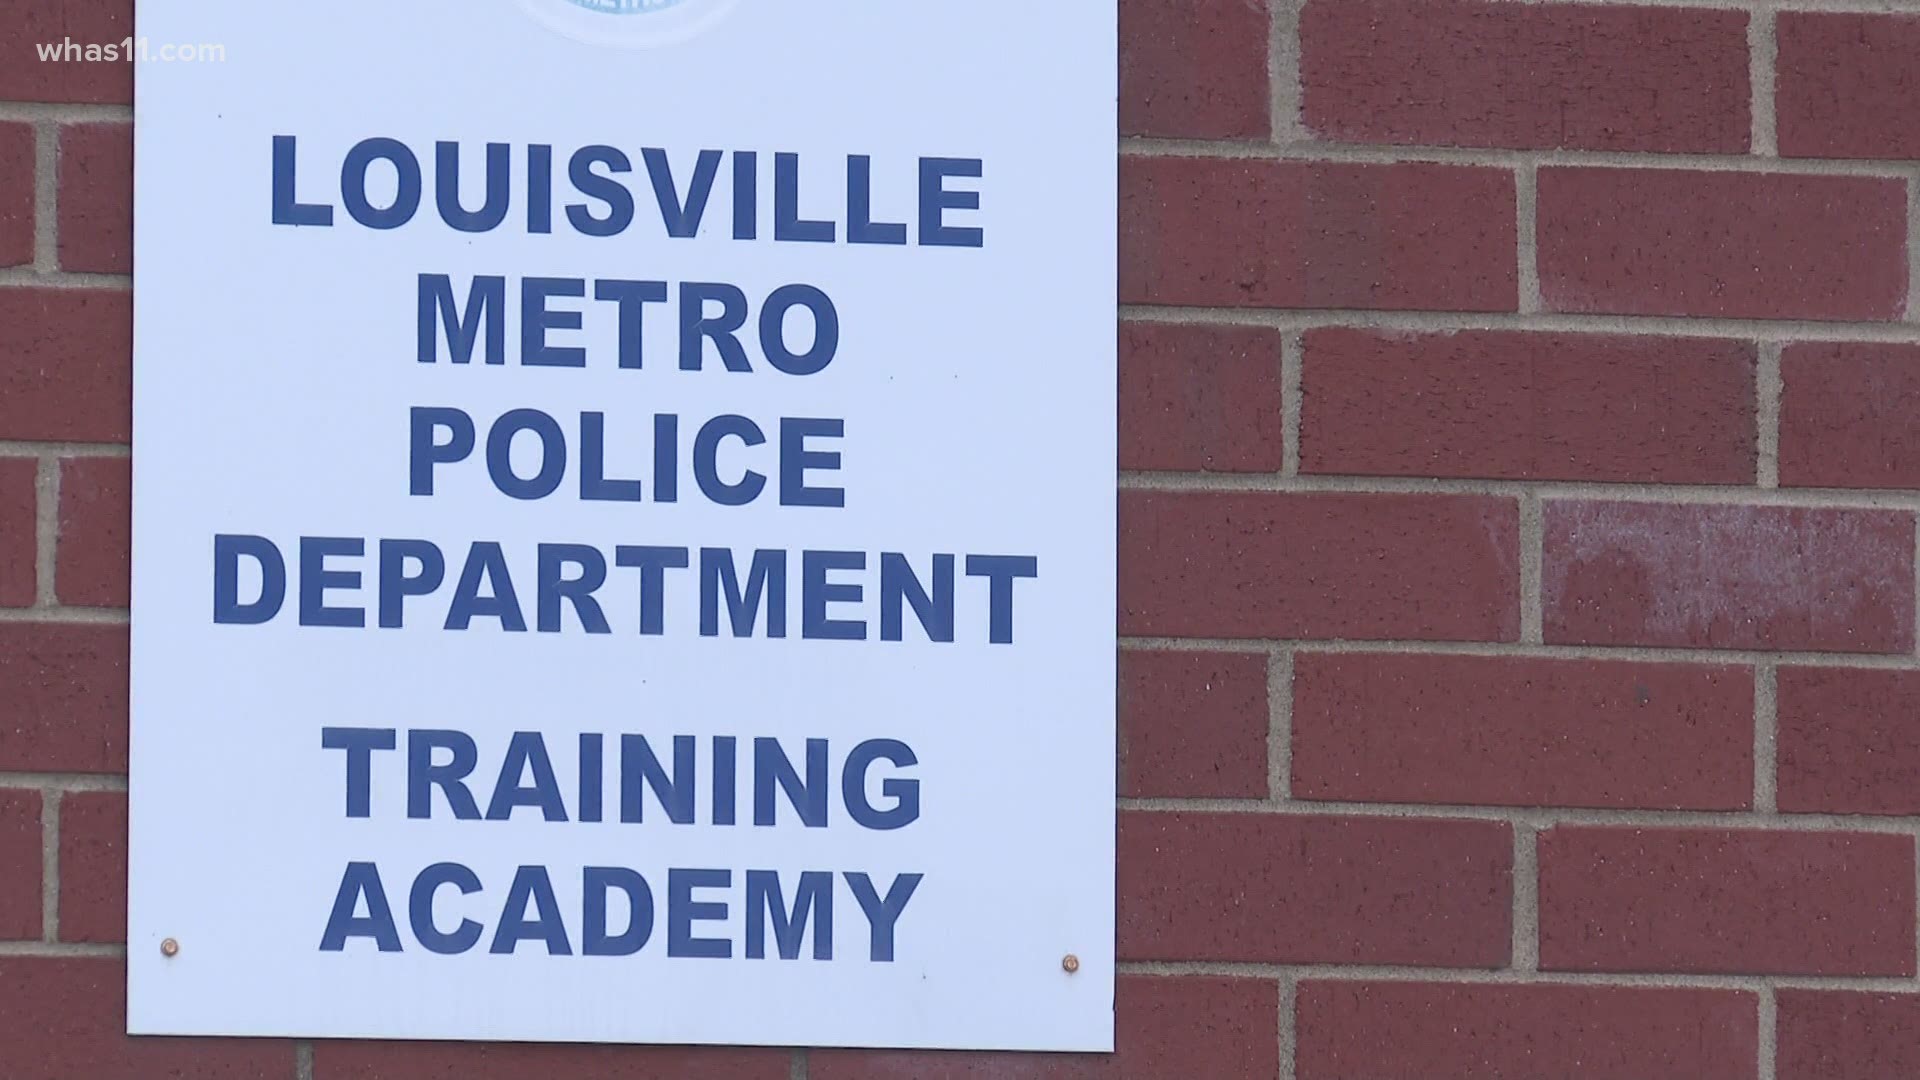 For those who are interested and qualified LMPD says this is your chance to apply for the job to help bring the kind of change Louisville wants to see.